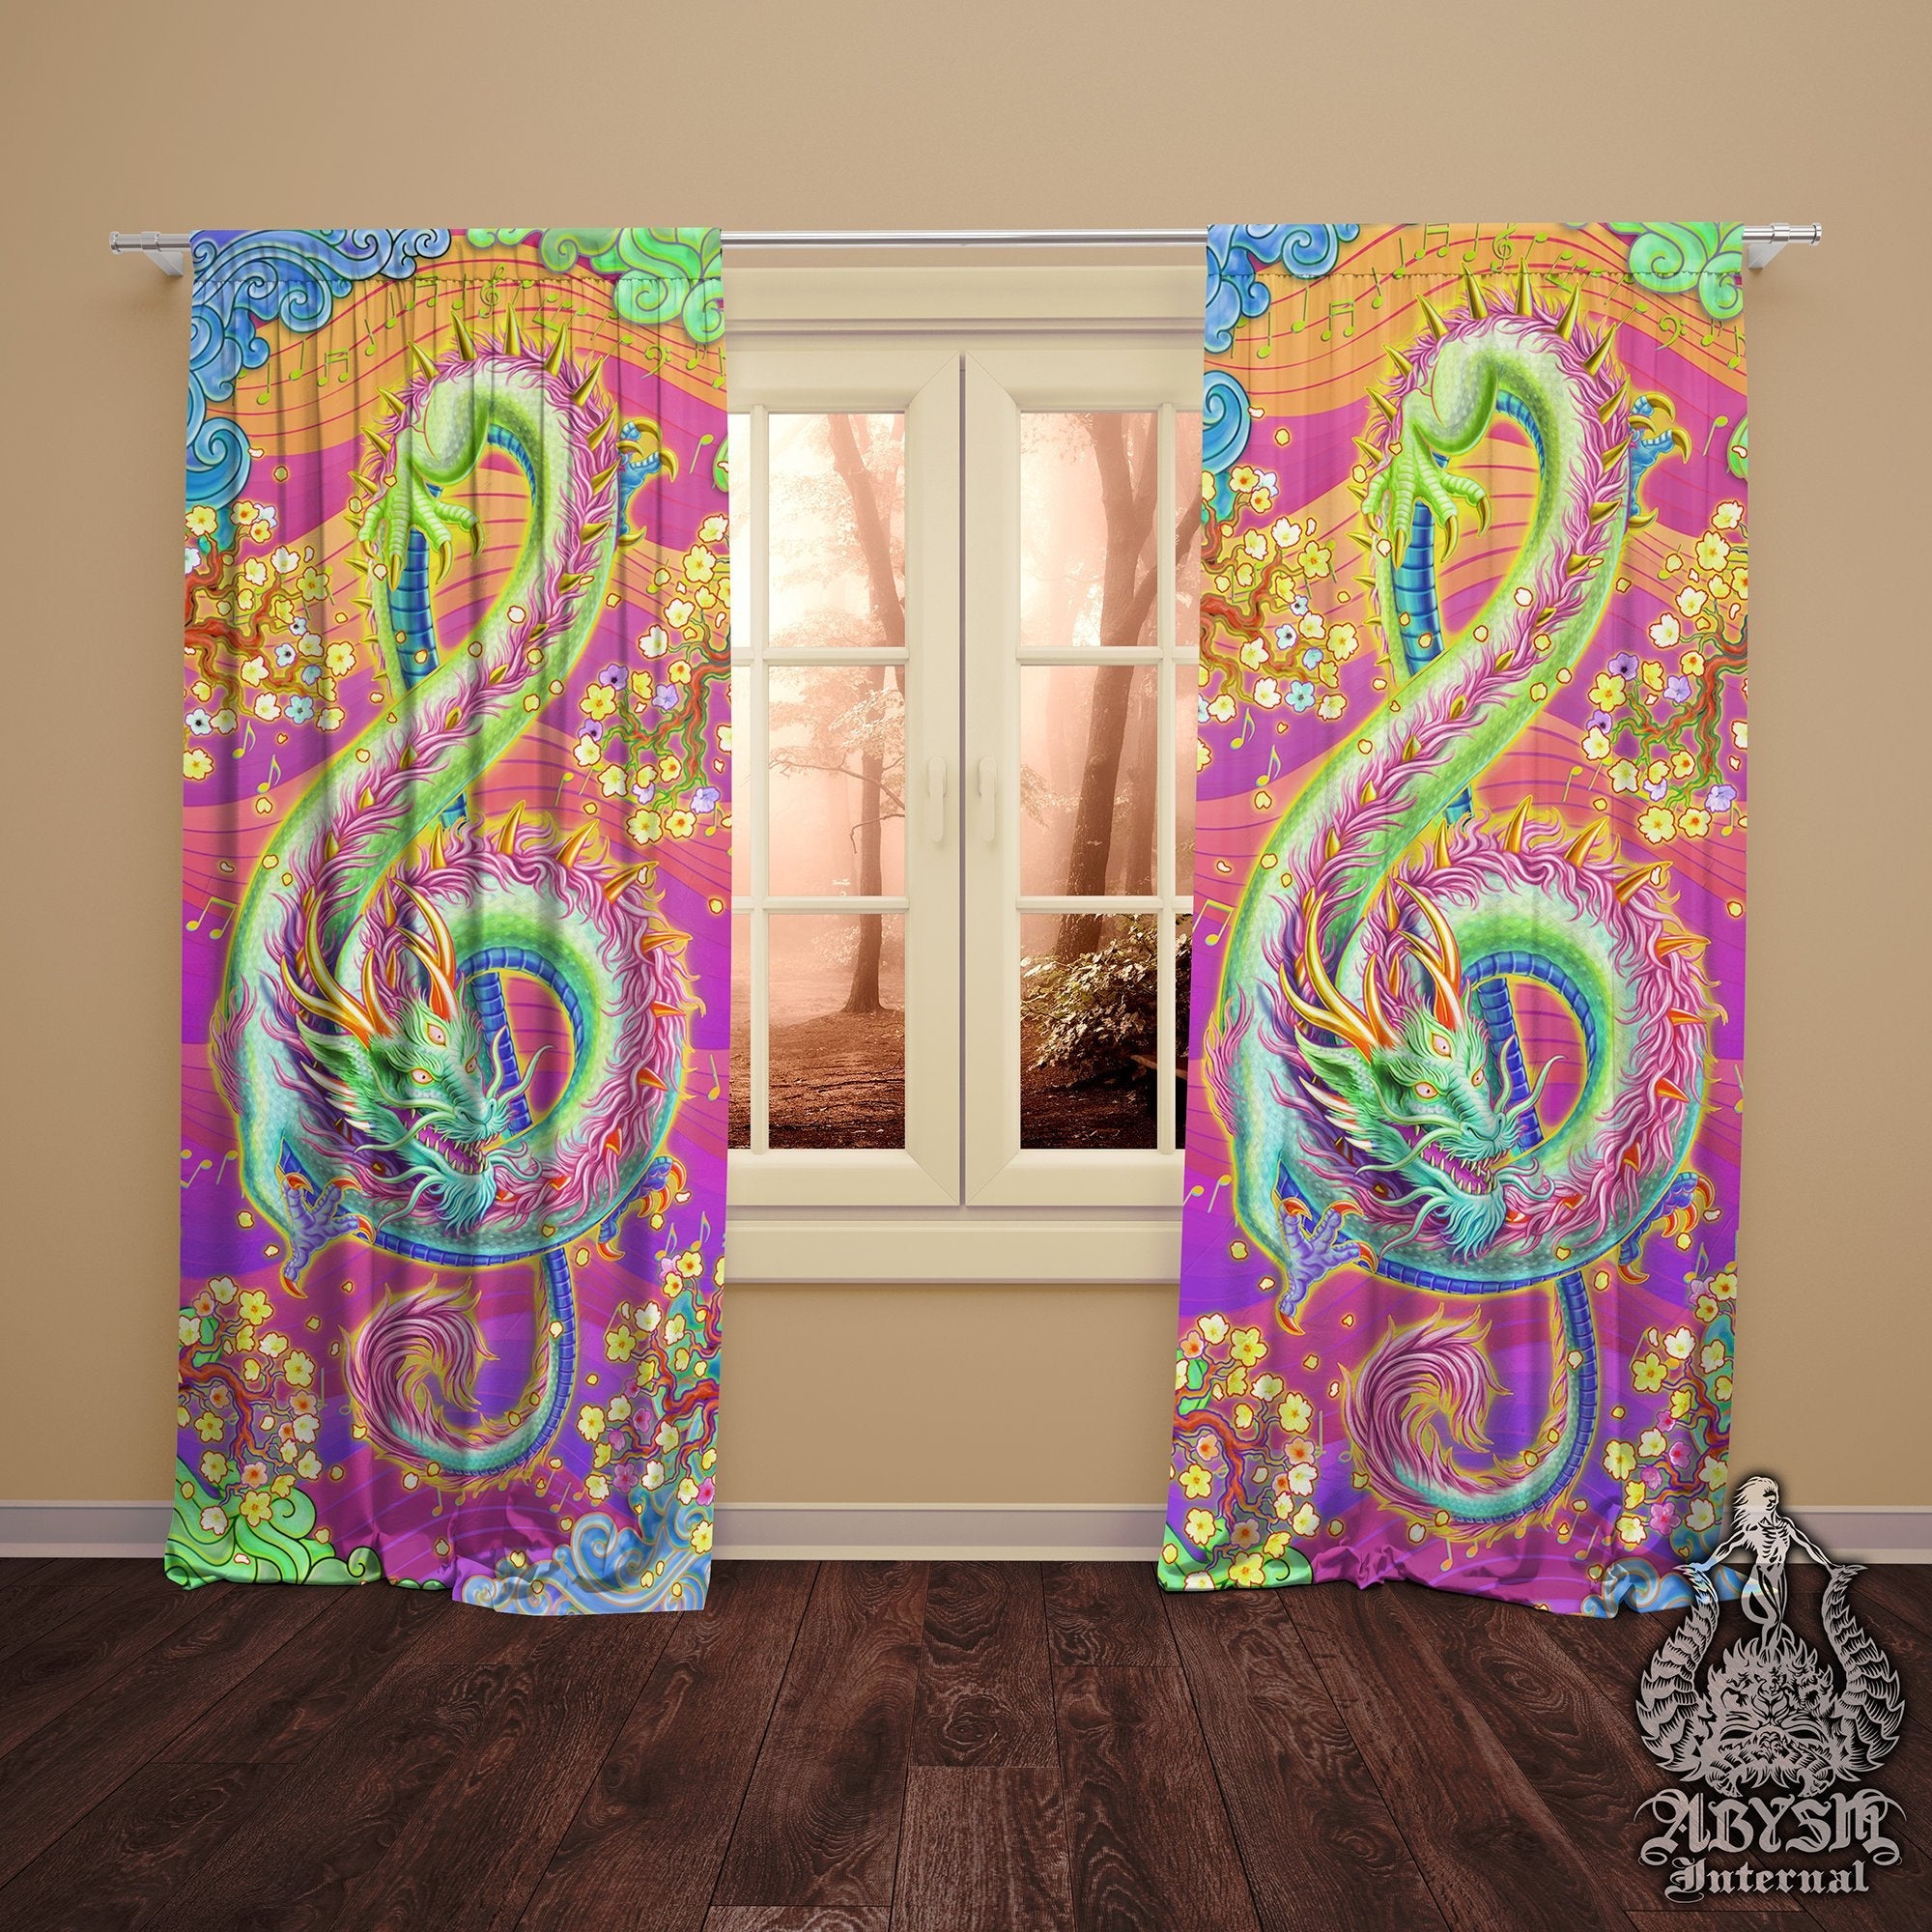 Psychedelic Blackout Curtains, Long Window Panels, Kidcore Room, Indie and Alternative Decor, Art Print - Psy Neon Dragon - Abysm Internal